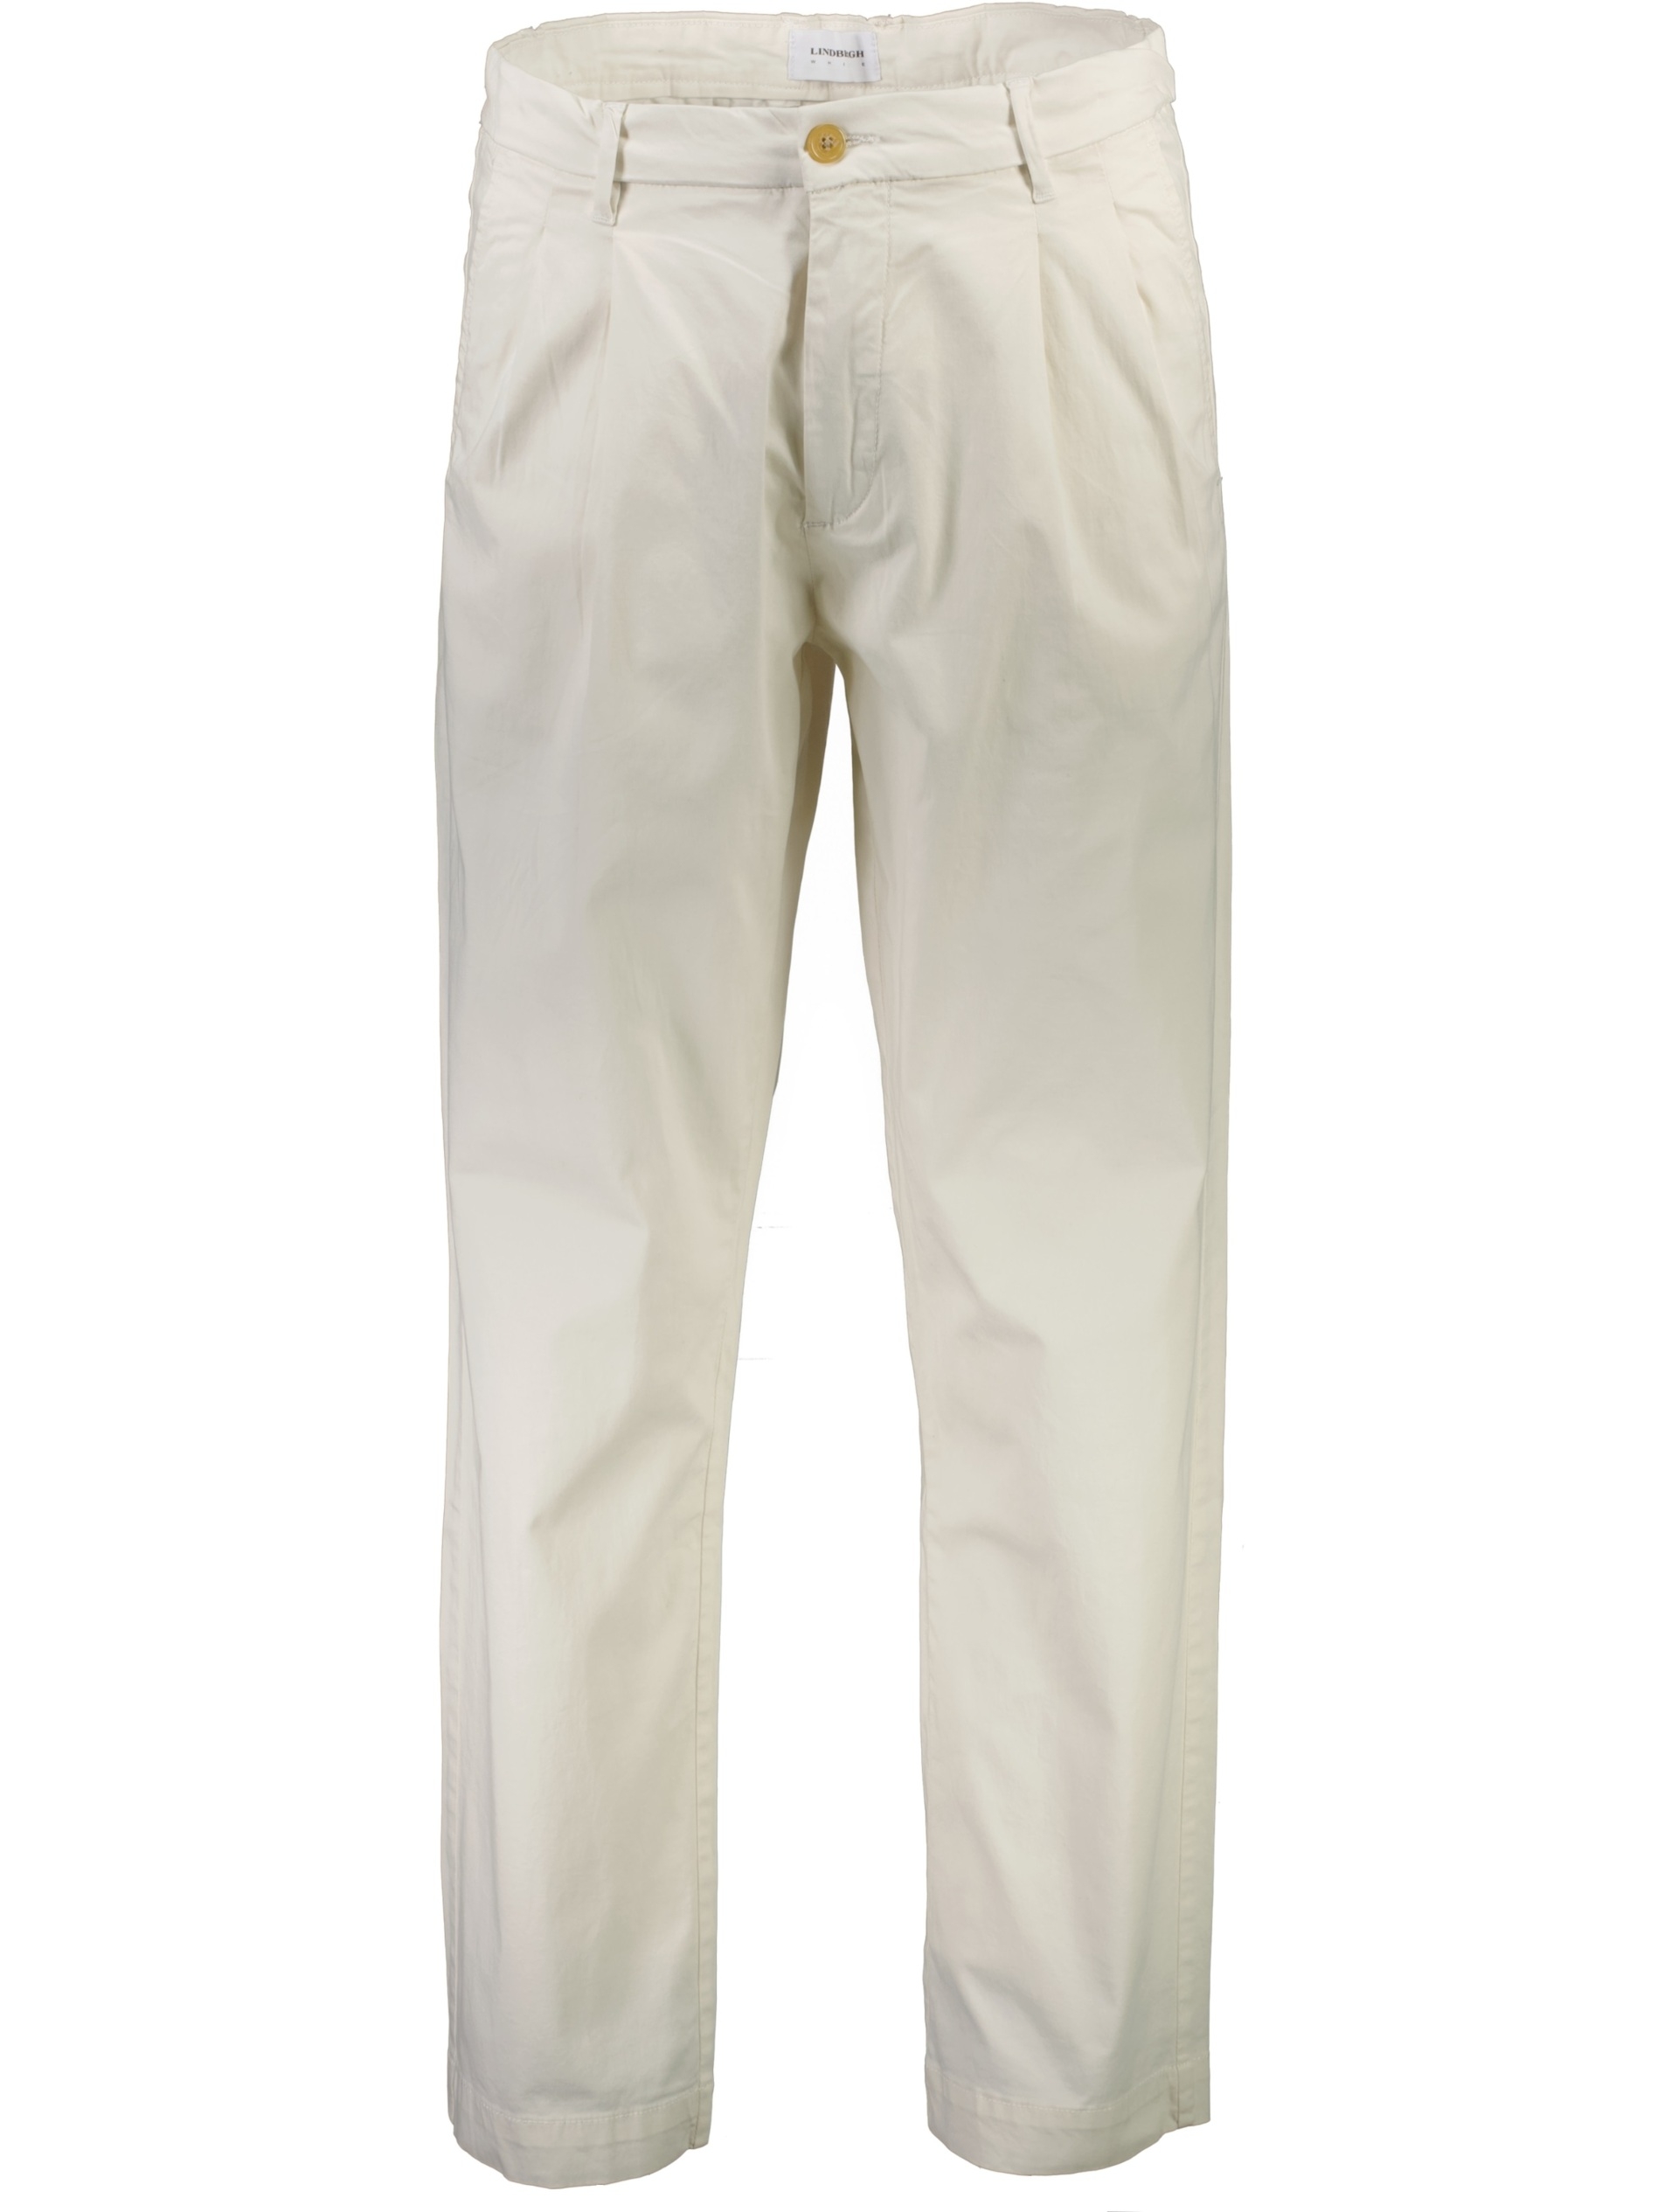 Lindbergh Casual pants white / off white